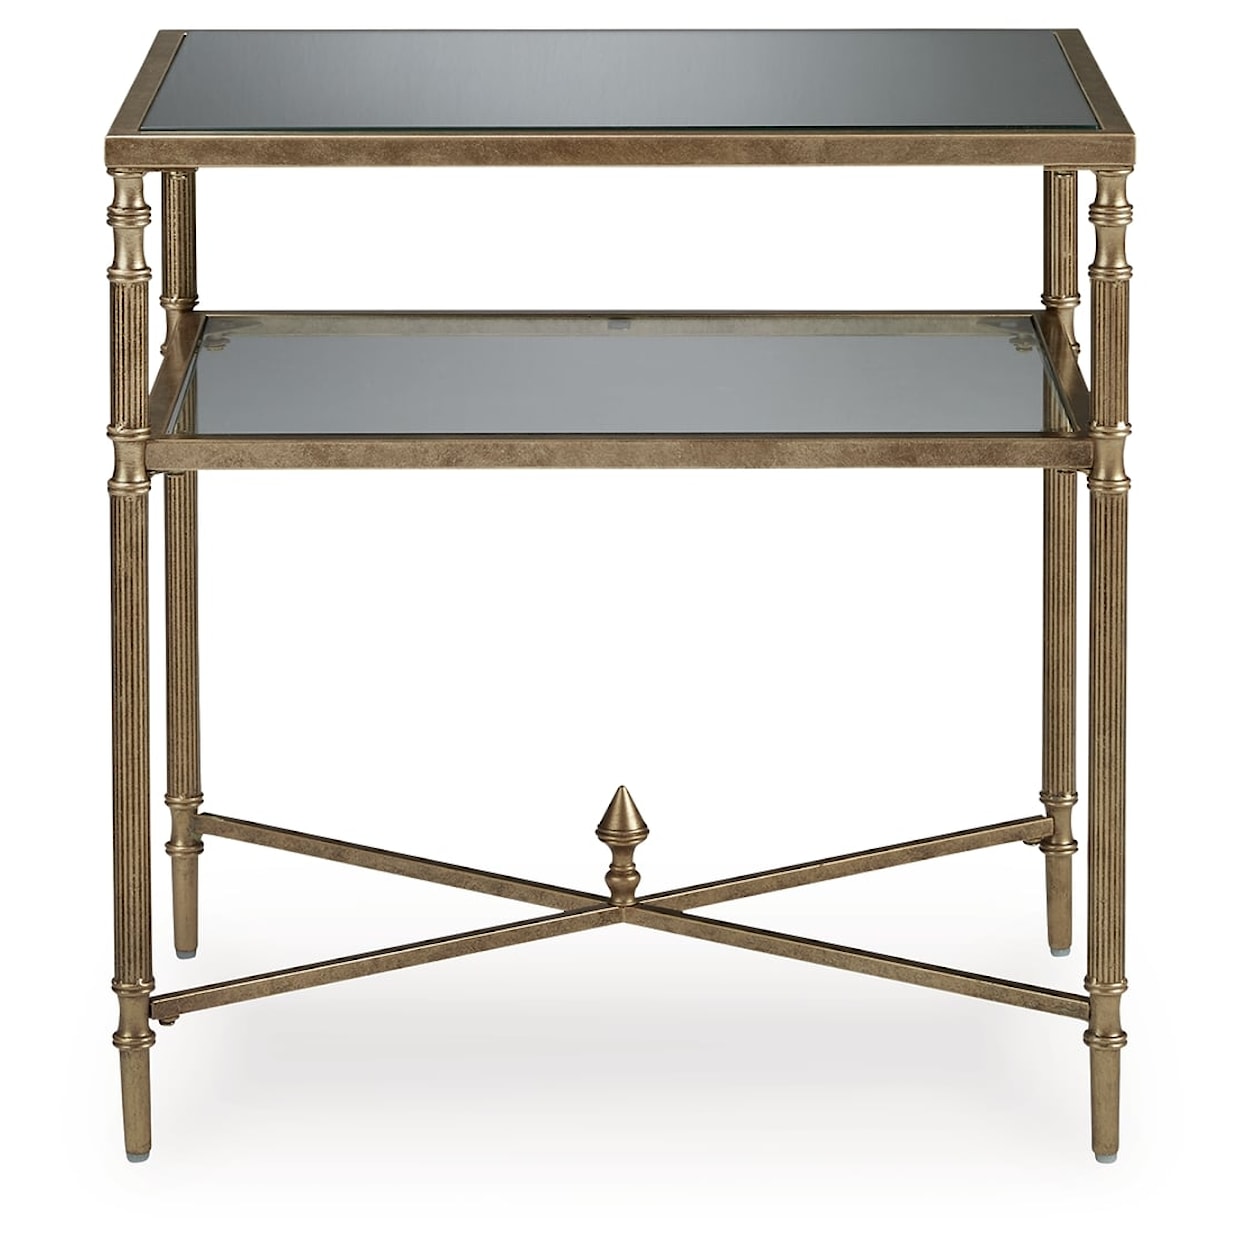 Signature Design by Ashley Cloverty Rectangular End Table